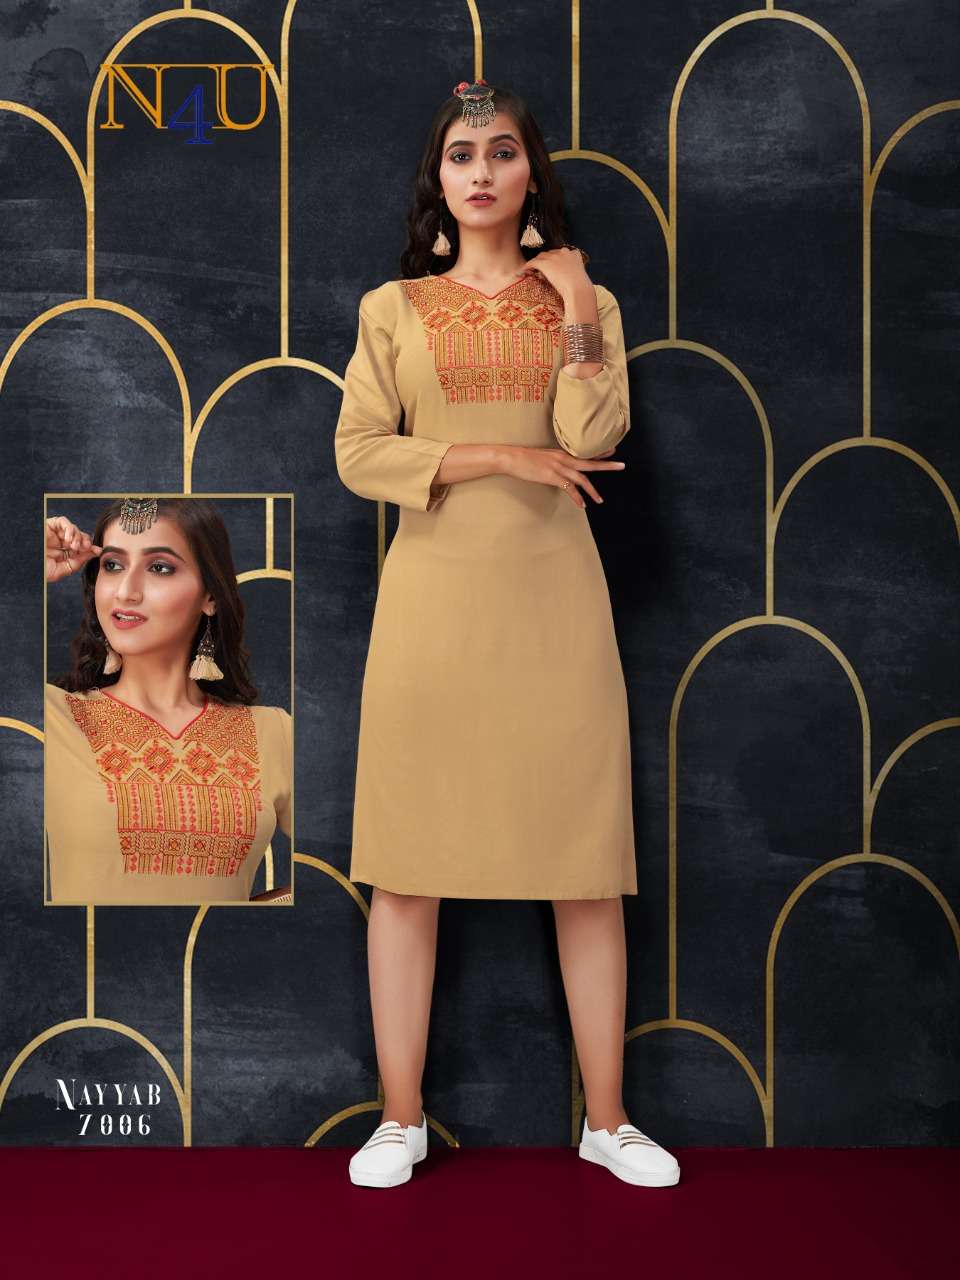 NAYYAB BY N4U 7001 TO 7007 SERIES BEAUTIFUL STYLISH FANCY COLORFUL CASUAL WEAR & ETHNIC WEAR & READY TO WEAR RAYON EMBROIDERY KURTIS AT WHOLESALE PRICE